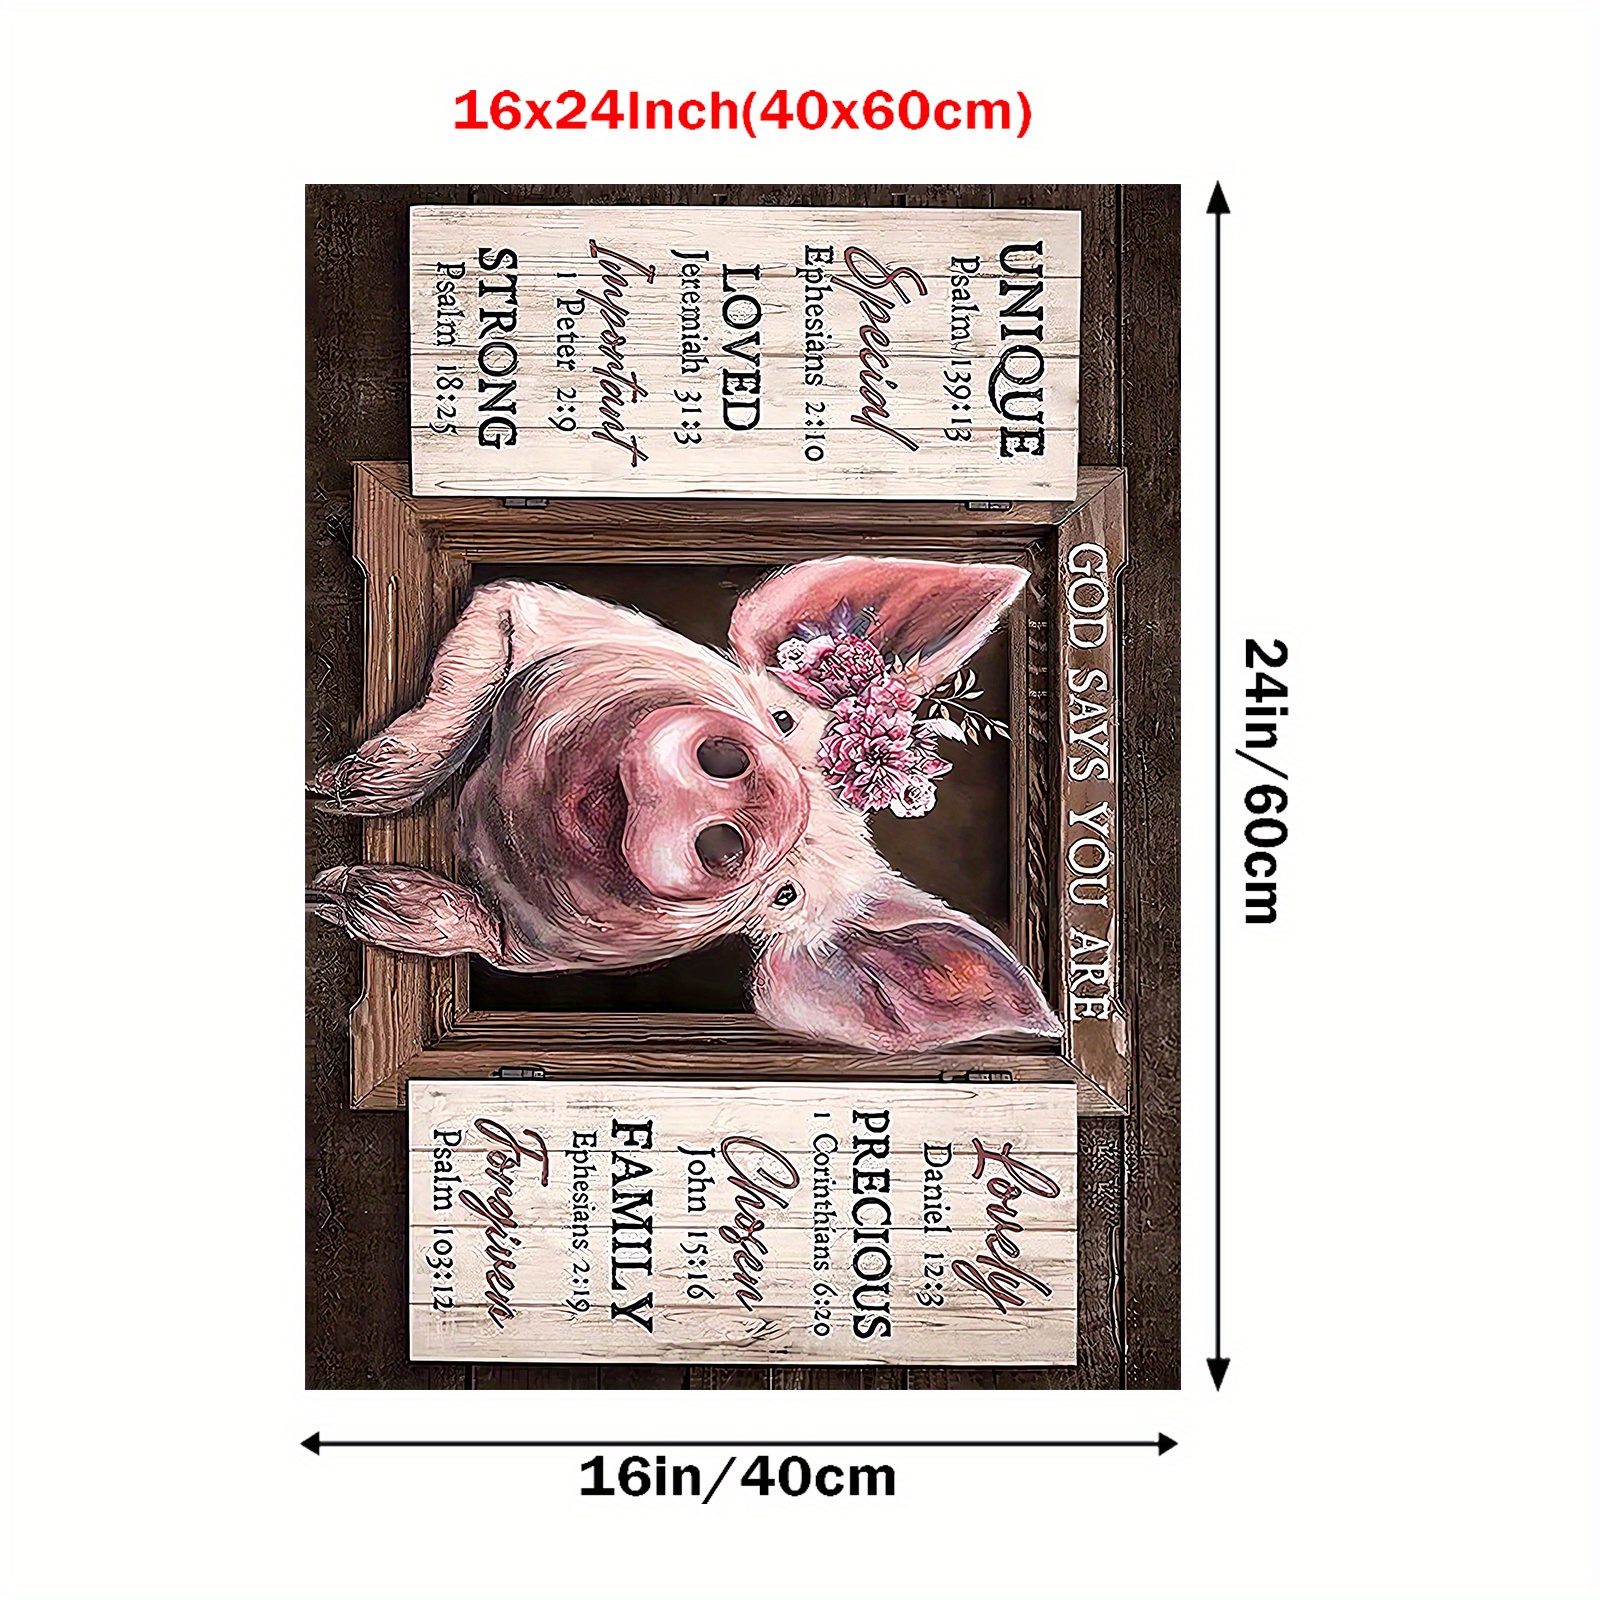 Cute Pig Canvas Wall Art For Home Decor Rustic Farmhouse Style Modern  Prints For Bathroom, Bedroom, Living Room, Kitchen, And Office Funny Piggy  Pictures God Says You Are